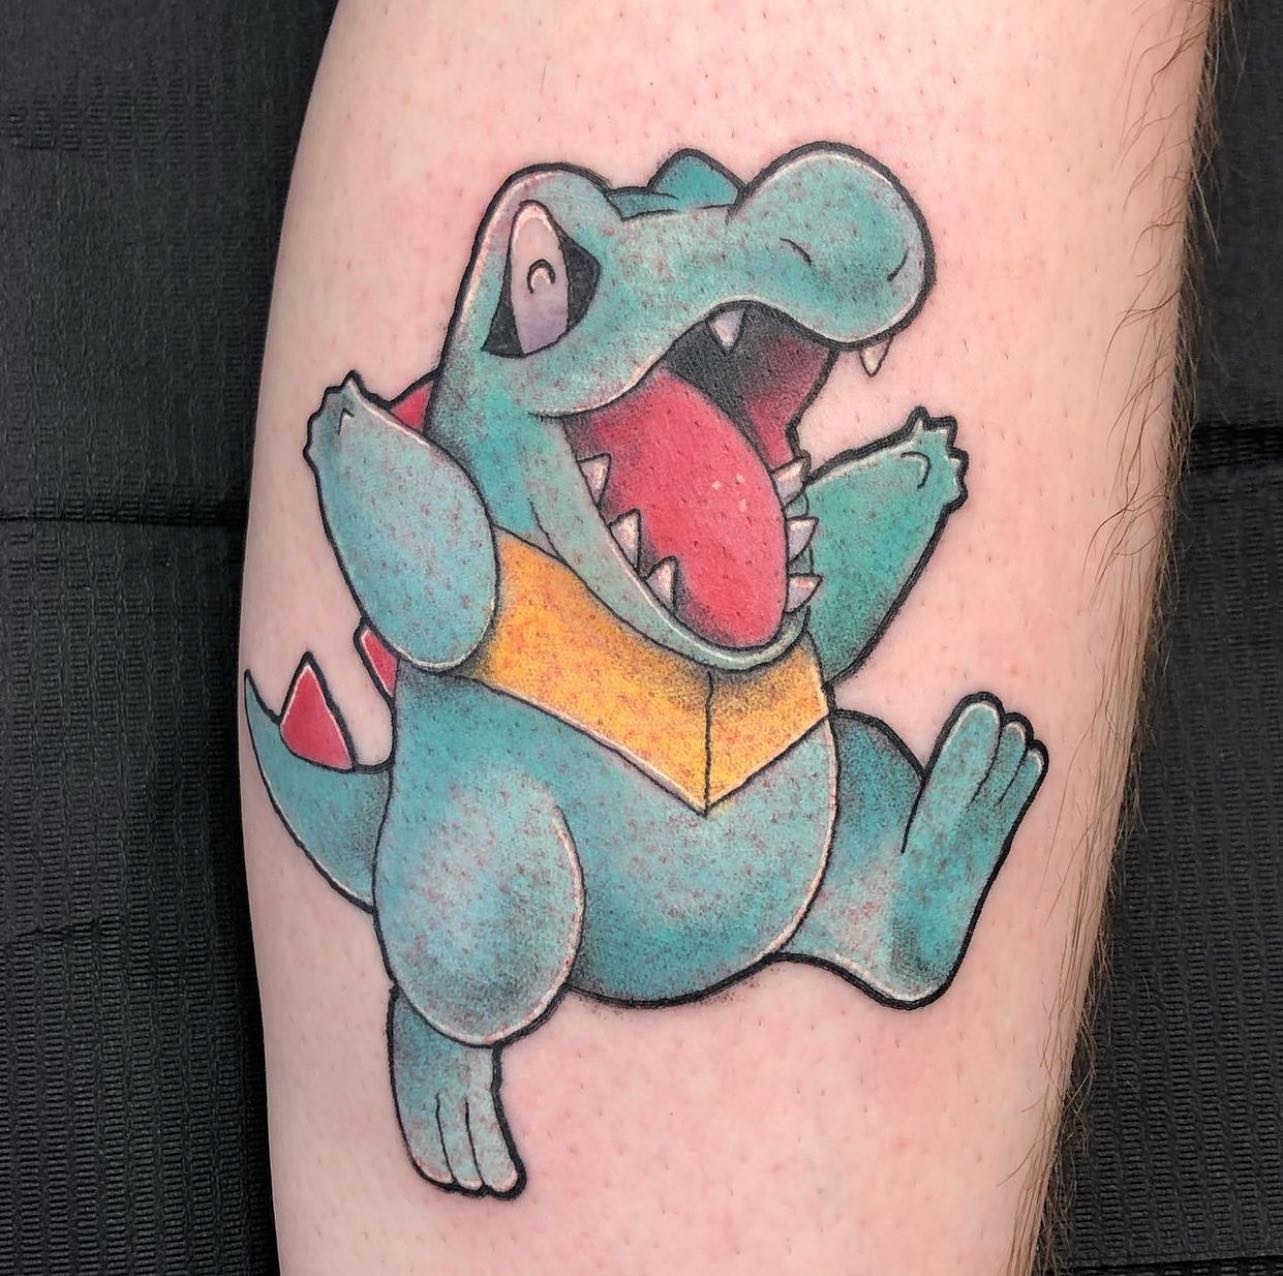 A lil’ Totodile from the lovely courtenaydicksontattoo ✨

She is a lover of Pokémon and all things fantasy so if you’re a fellow lover, contact her or the shop for pricing 🌸

               